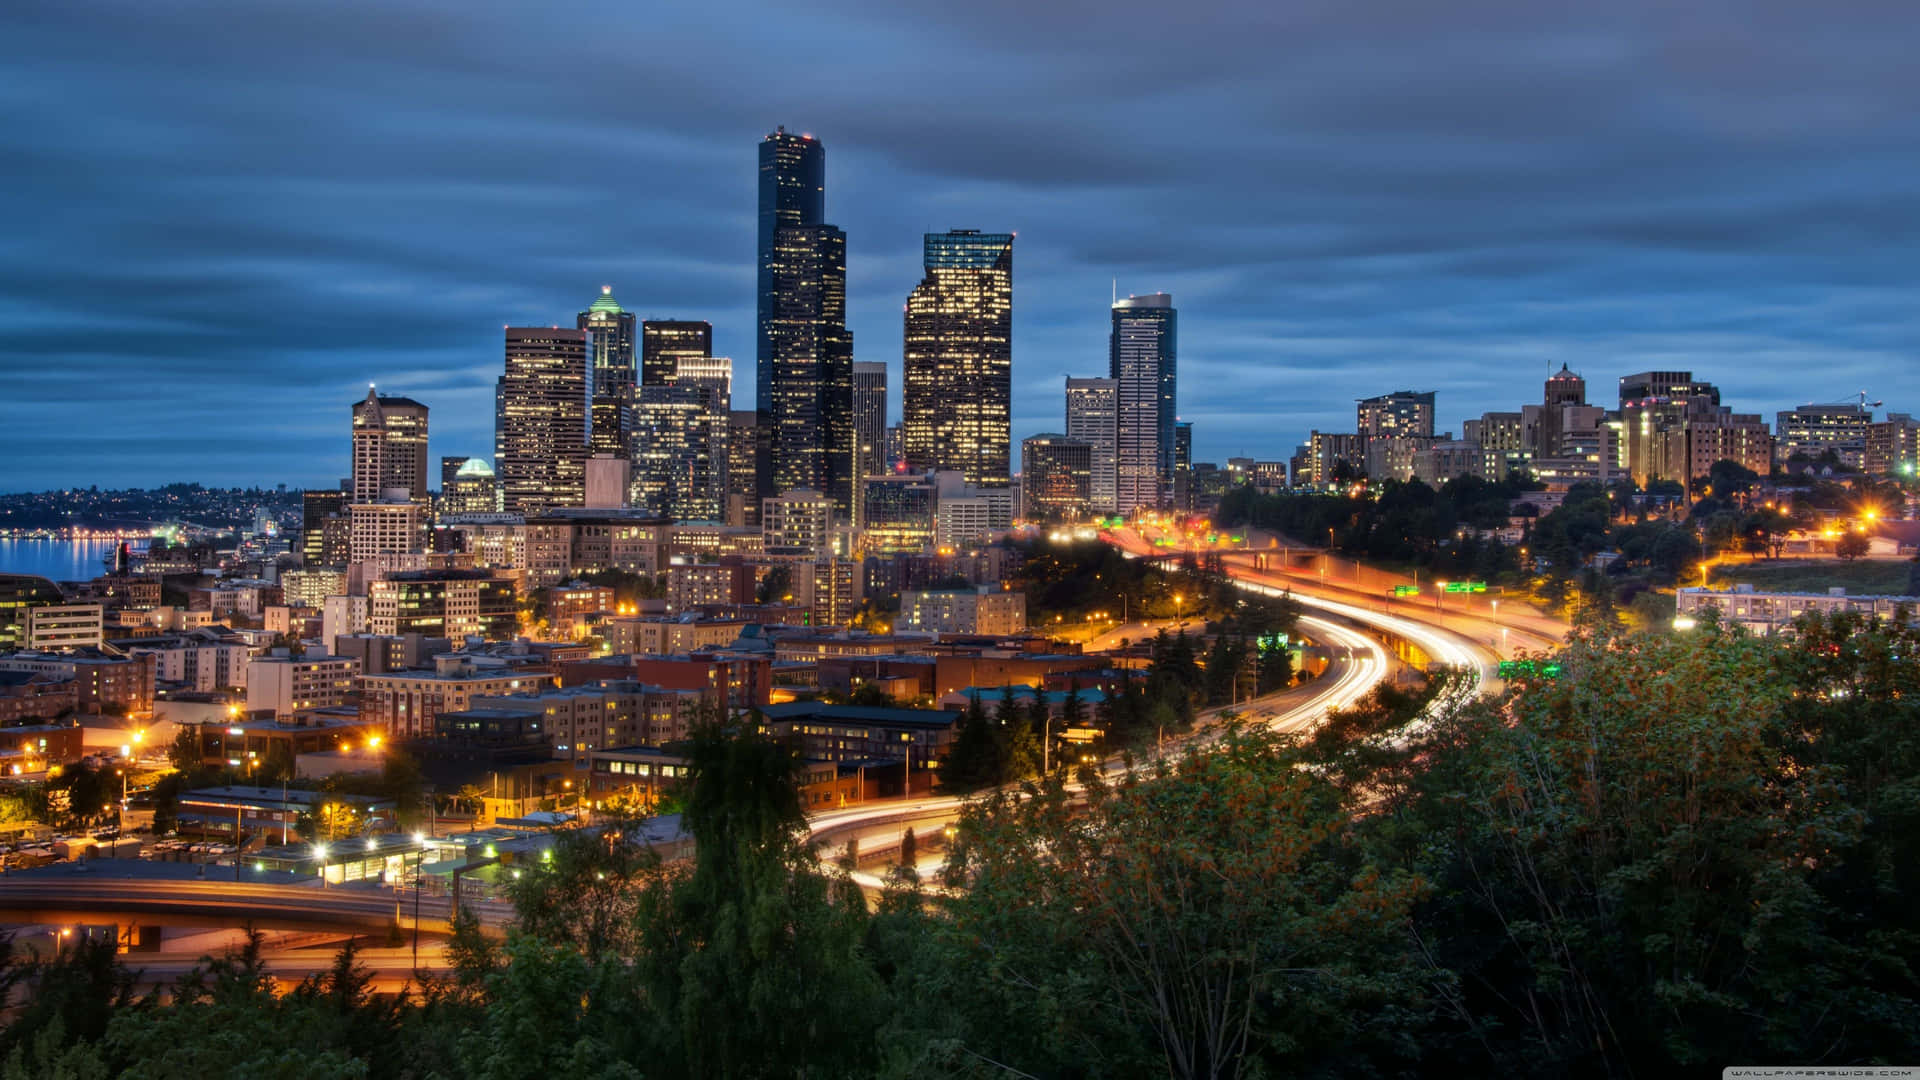 "View of Seattle Skyline with Mount Rainier in the Distance" Wallpaper